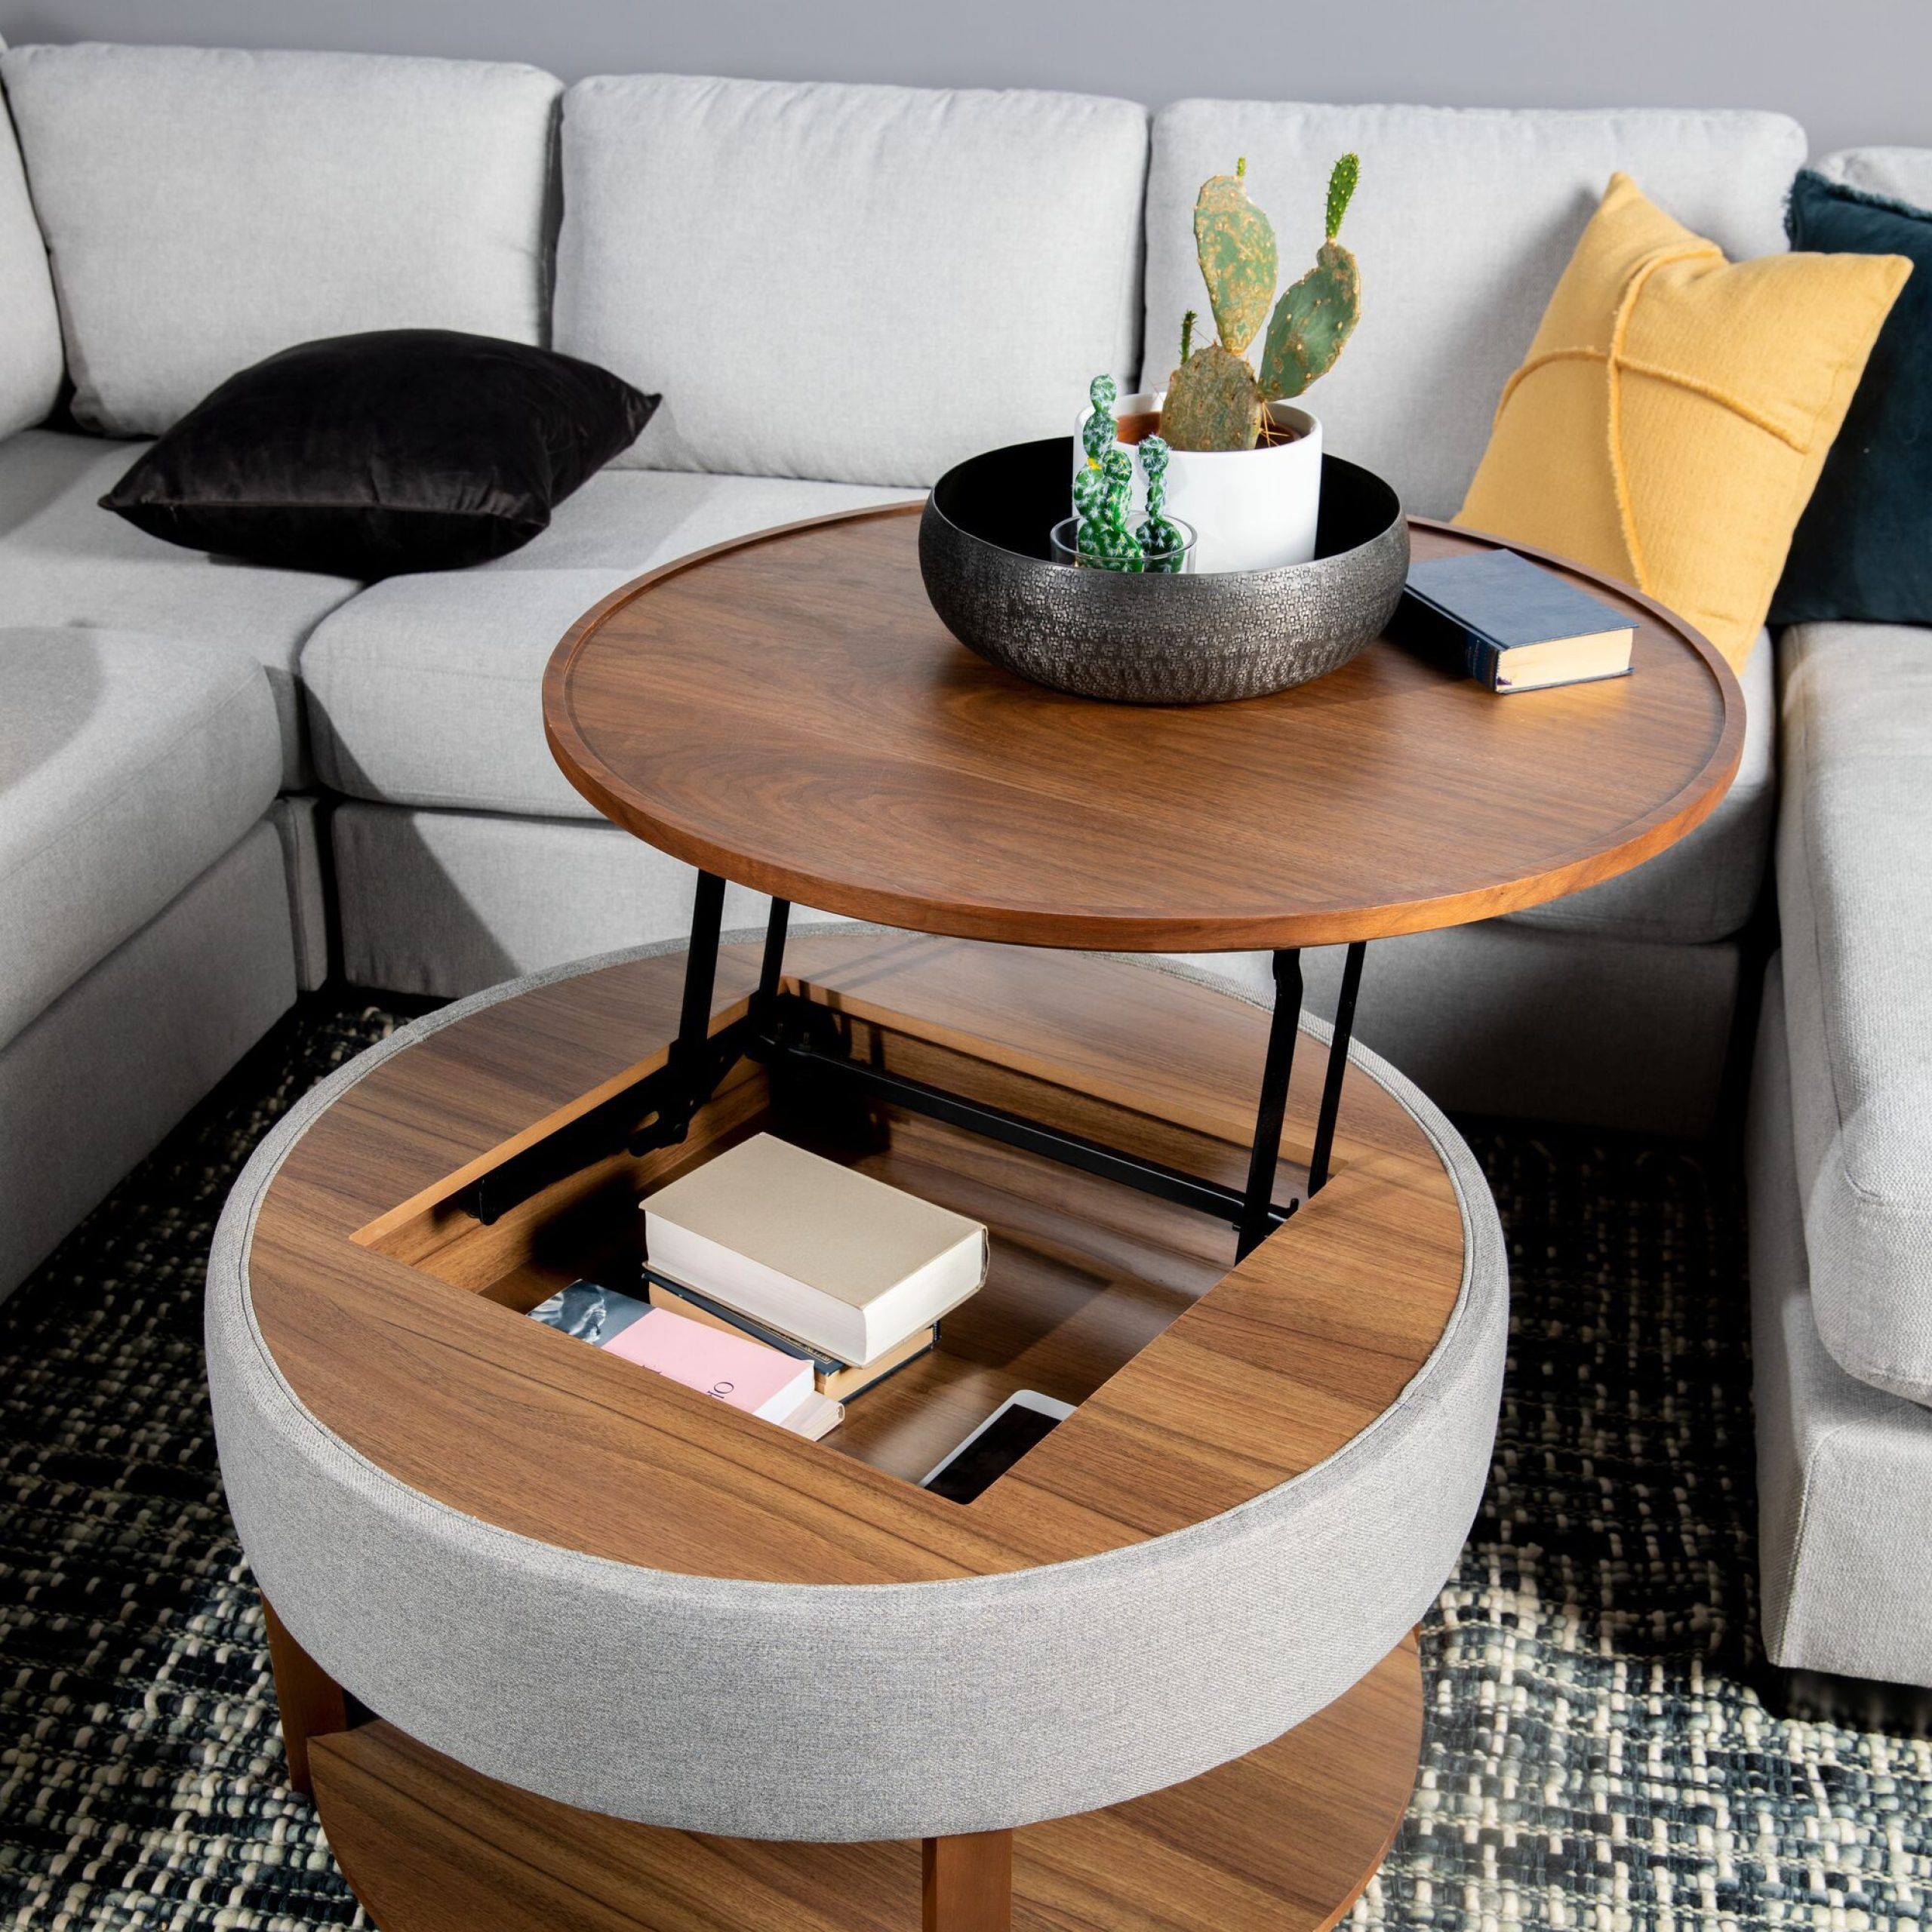 Damian Walnut Wood Veneer Lift Top Coffee Table With Storage In 2021 Throughout Modern Wooden Lift Top Tables (View 9 of 20)